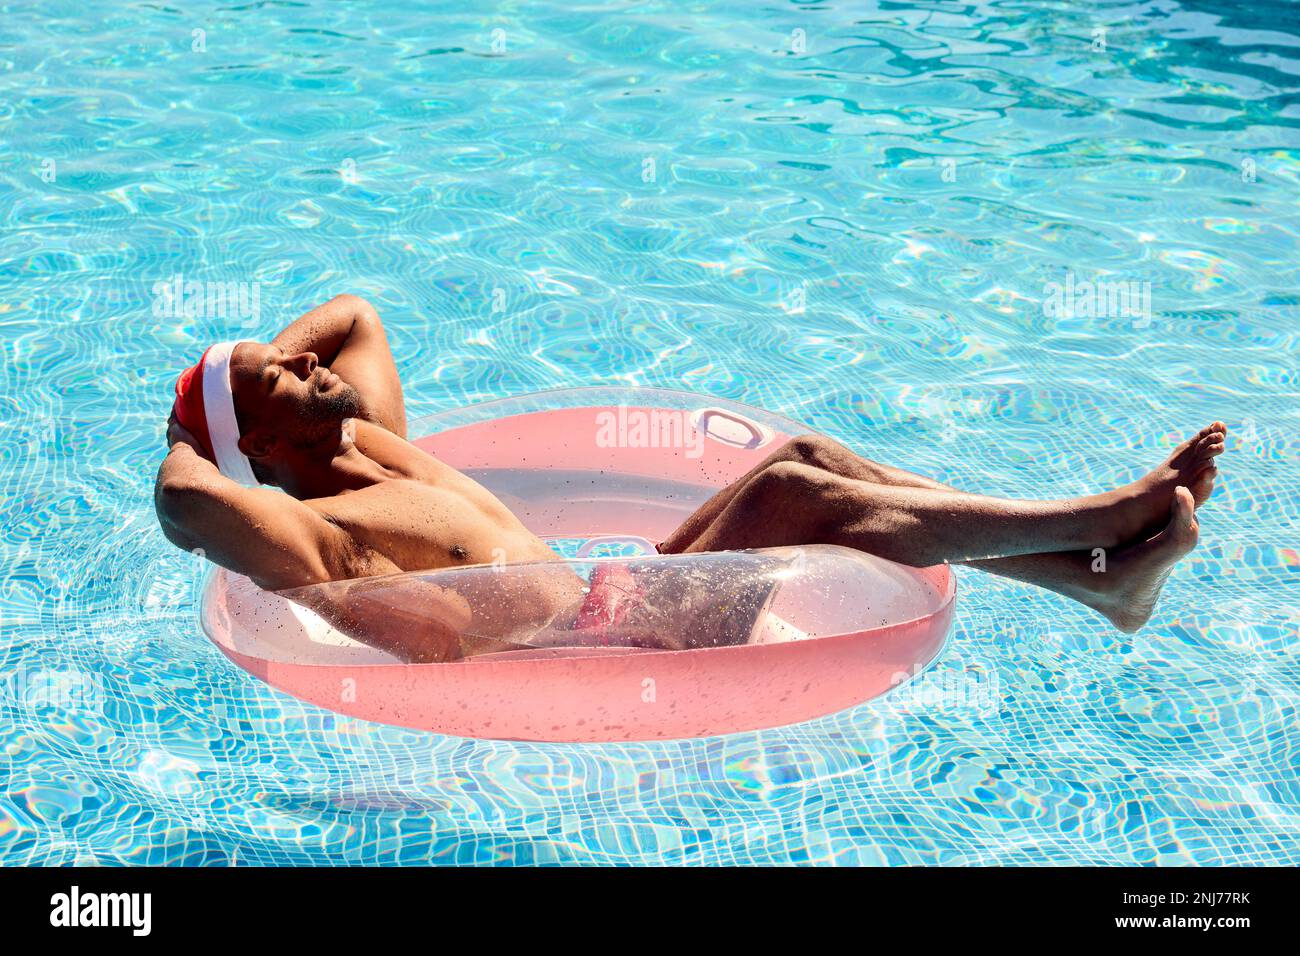 Man On Christmas Holiday Floating On Inflatable In Swimming Pool Wearing Santa Hat Stock Photo